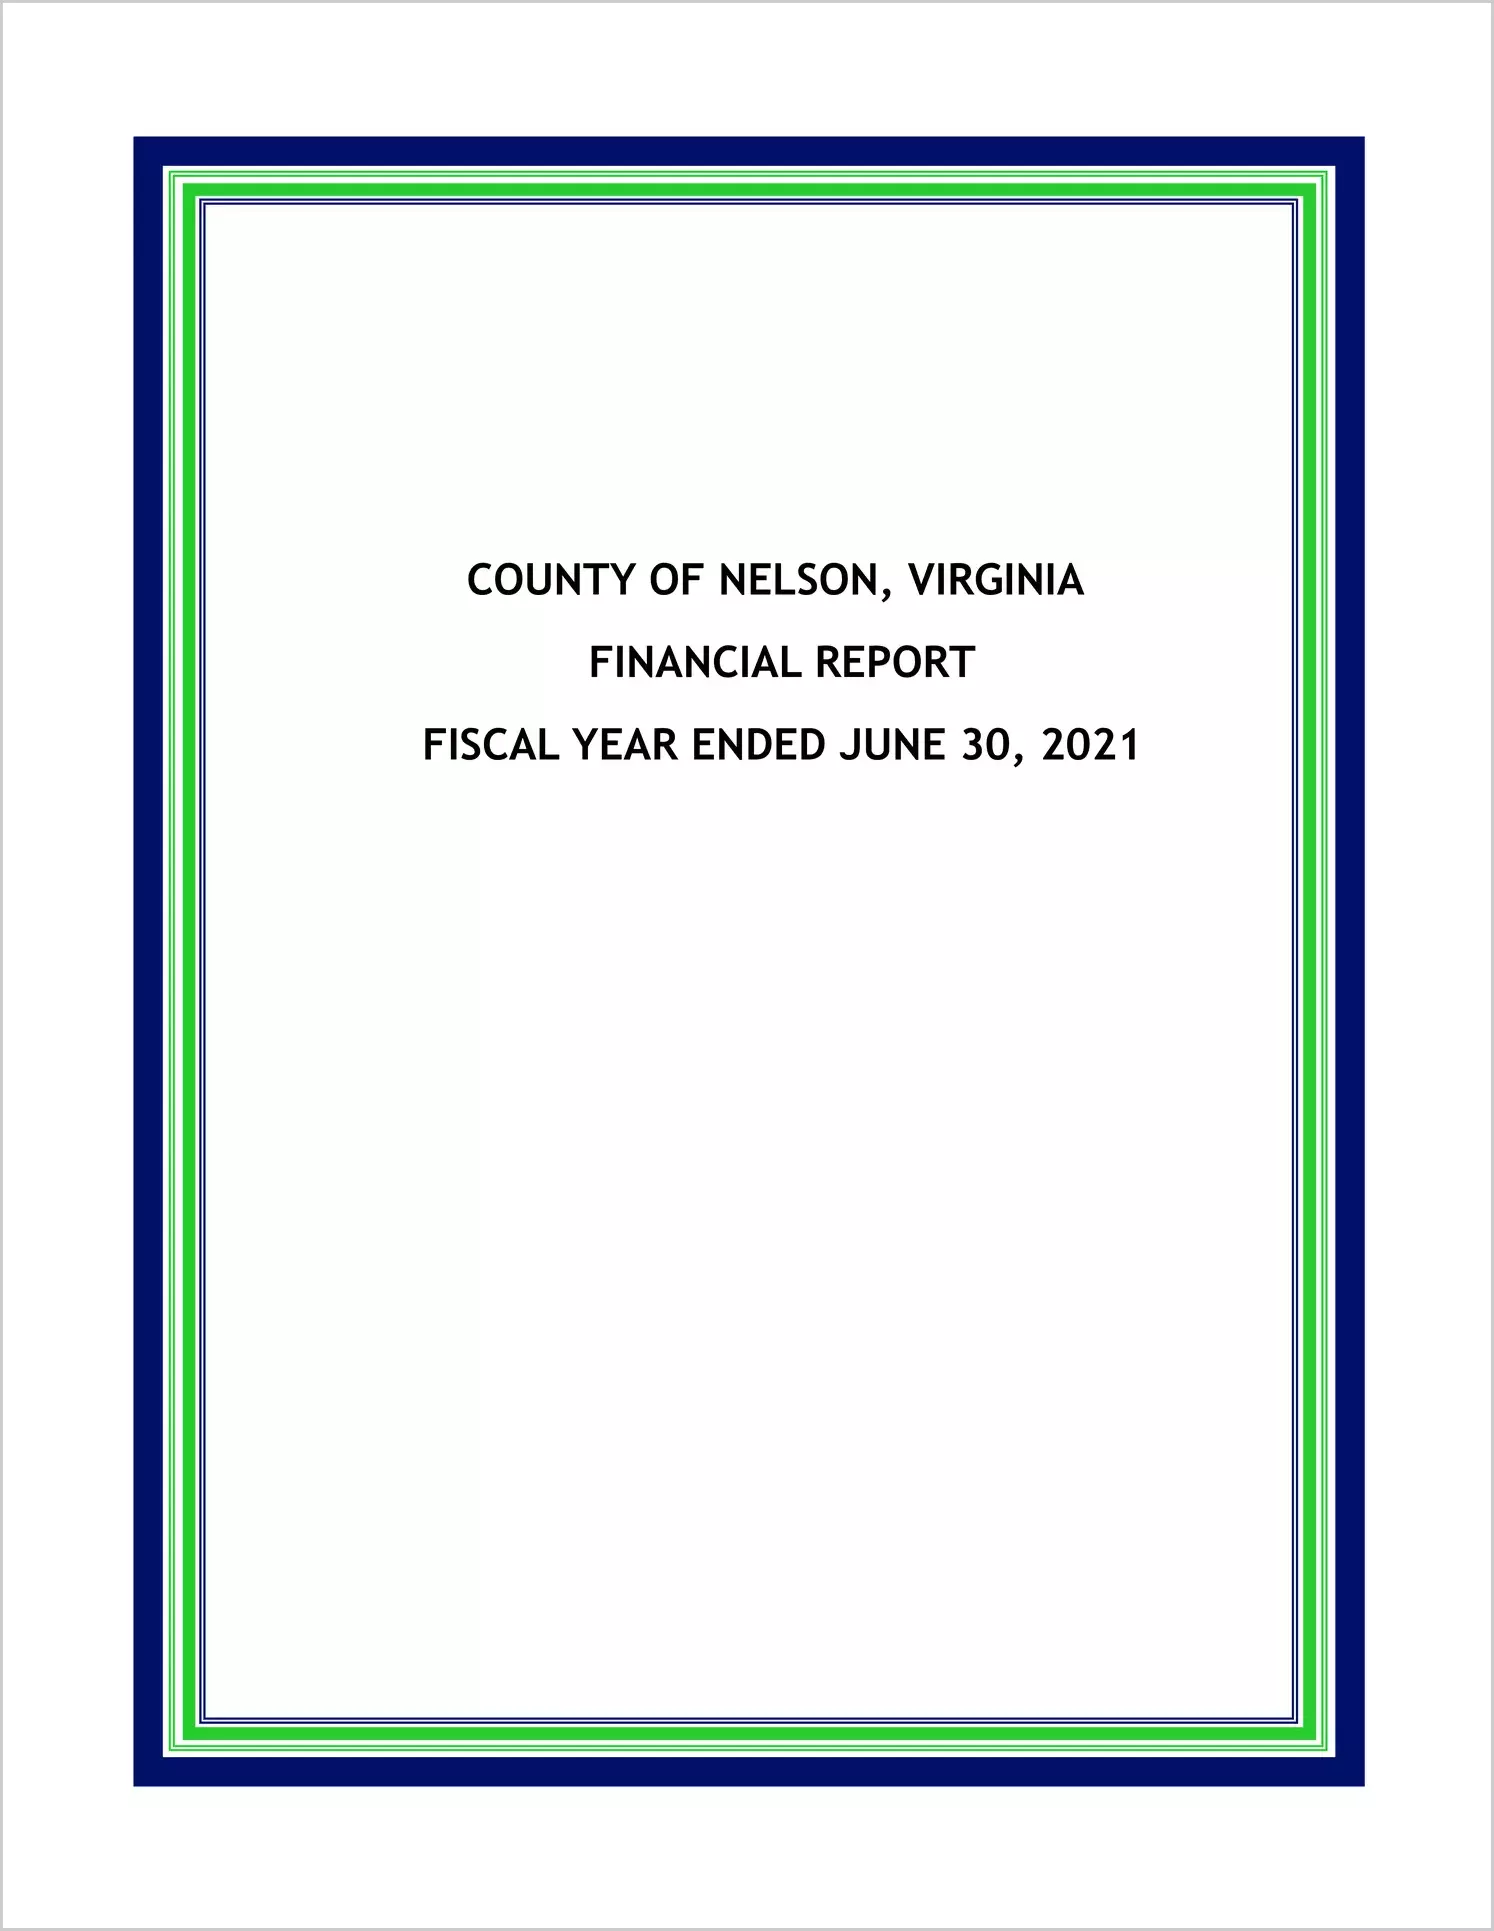 2021 Annual Financial Report for County of Nelson